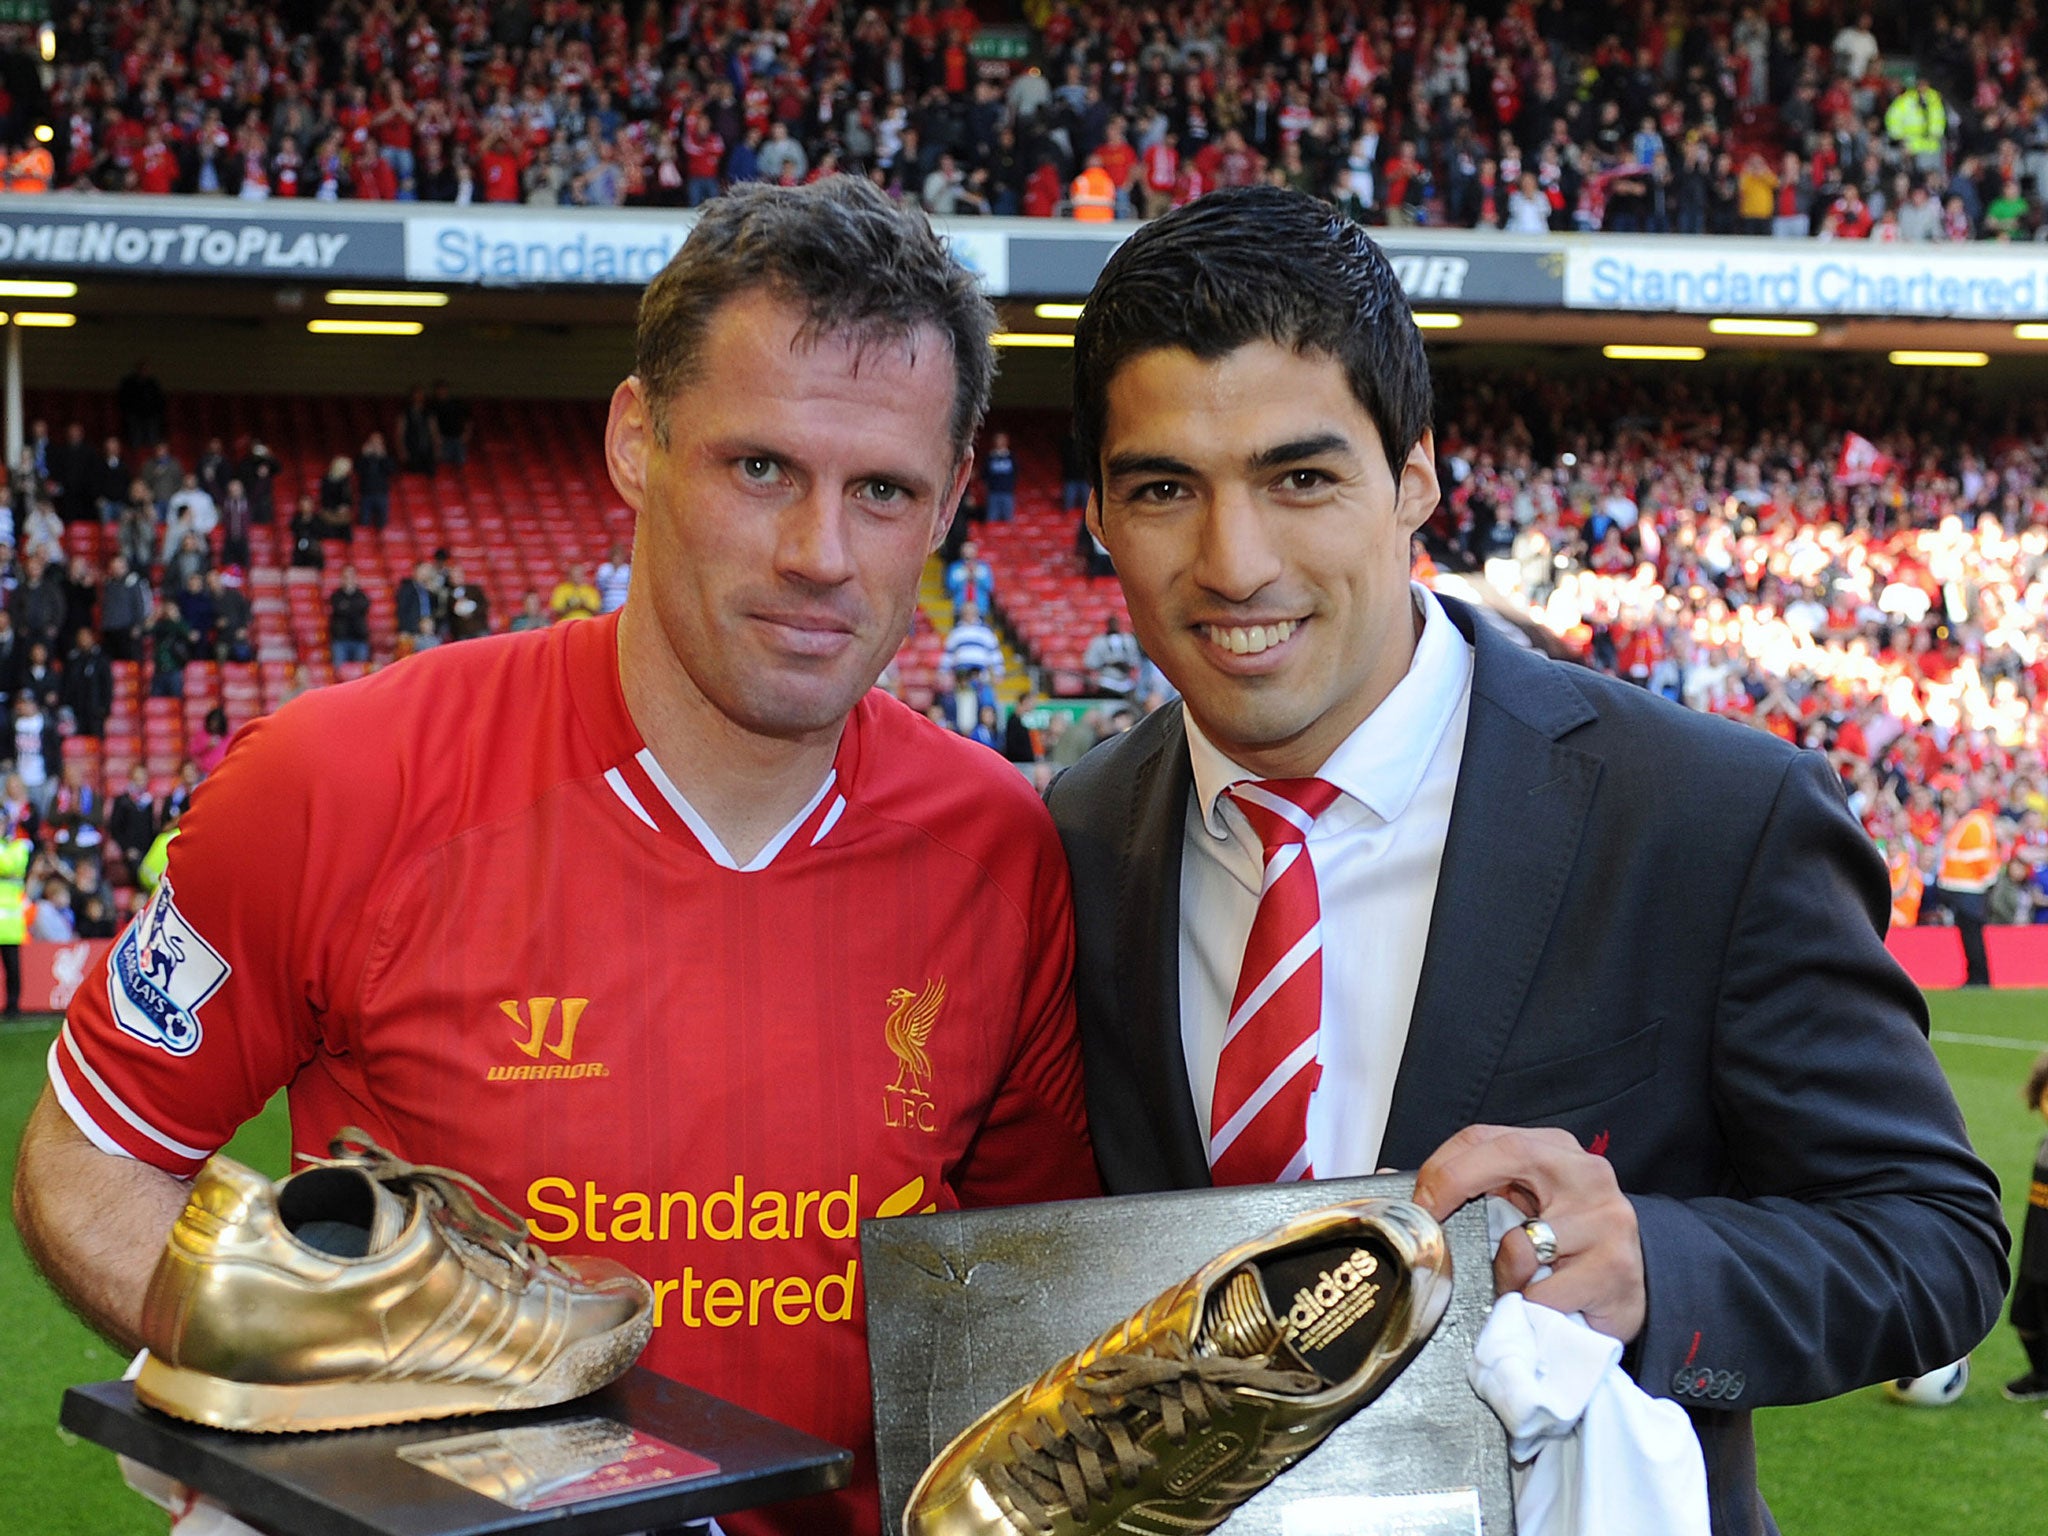 Jamie Carragher and Luis Suarez of Liverpool pose at the end of the Barclays Premier League match